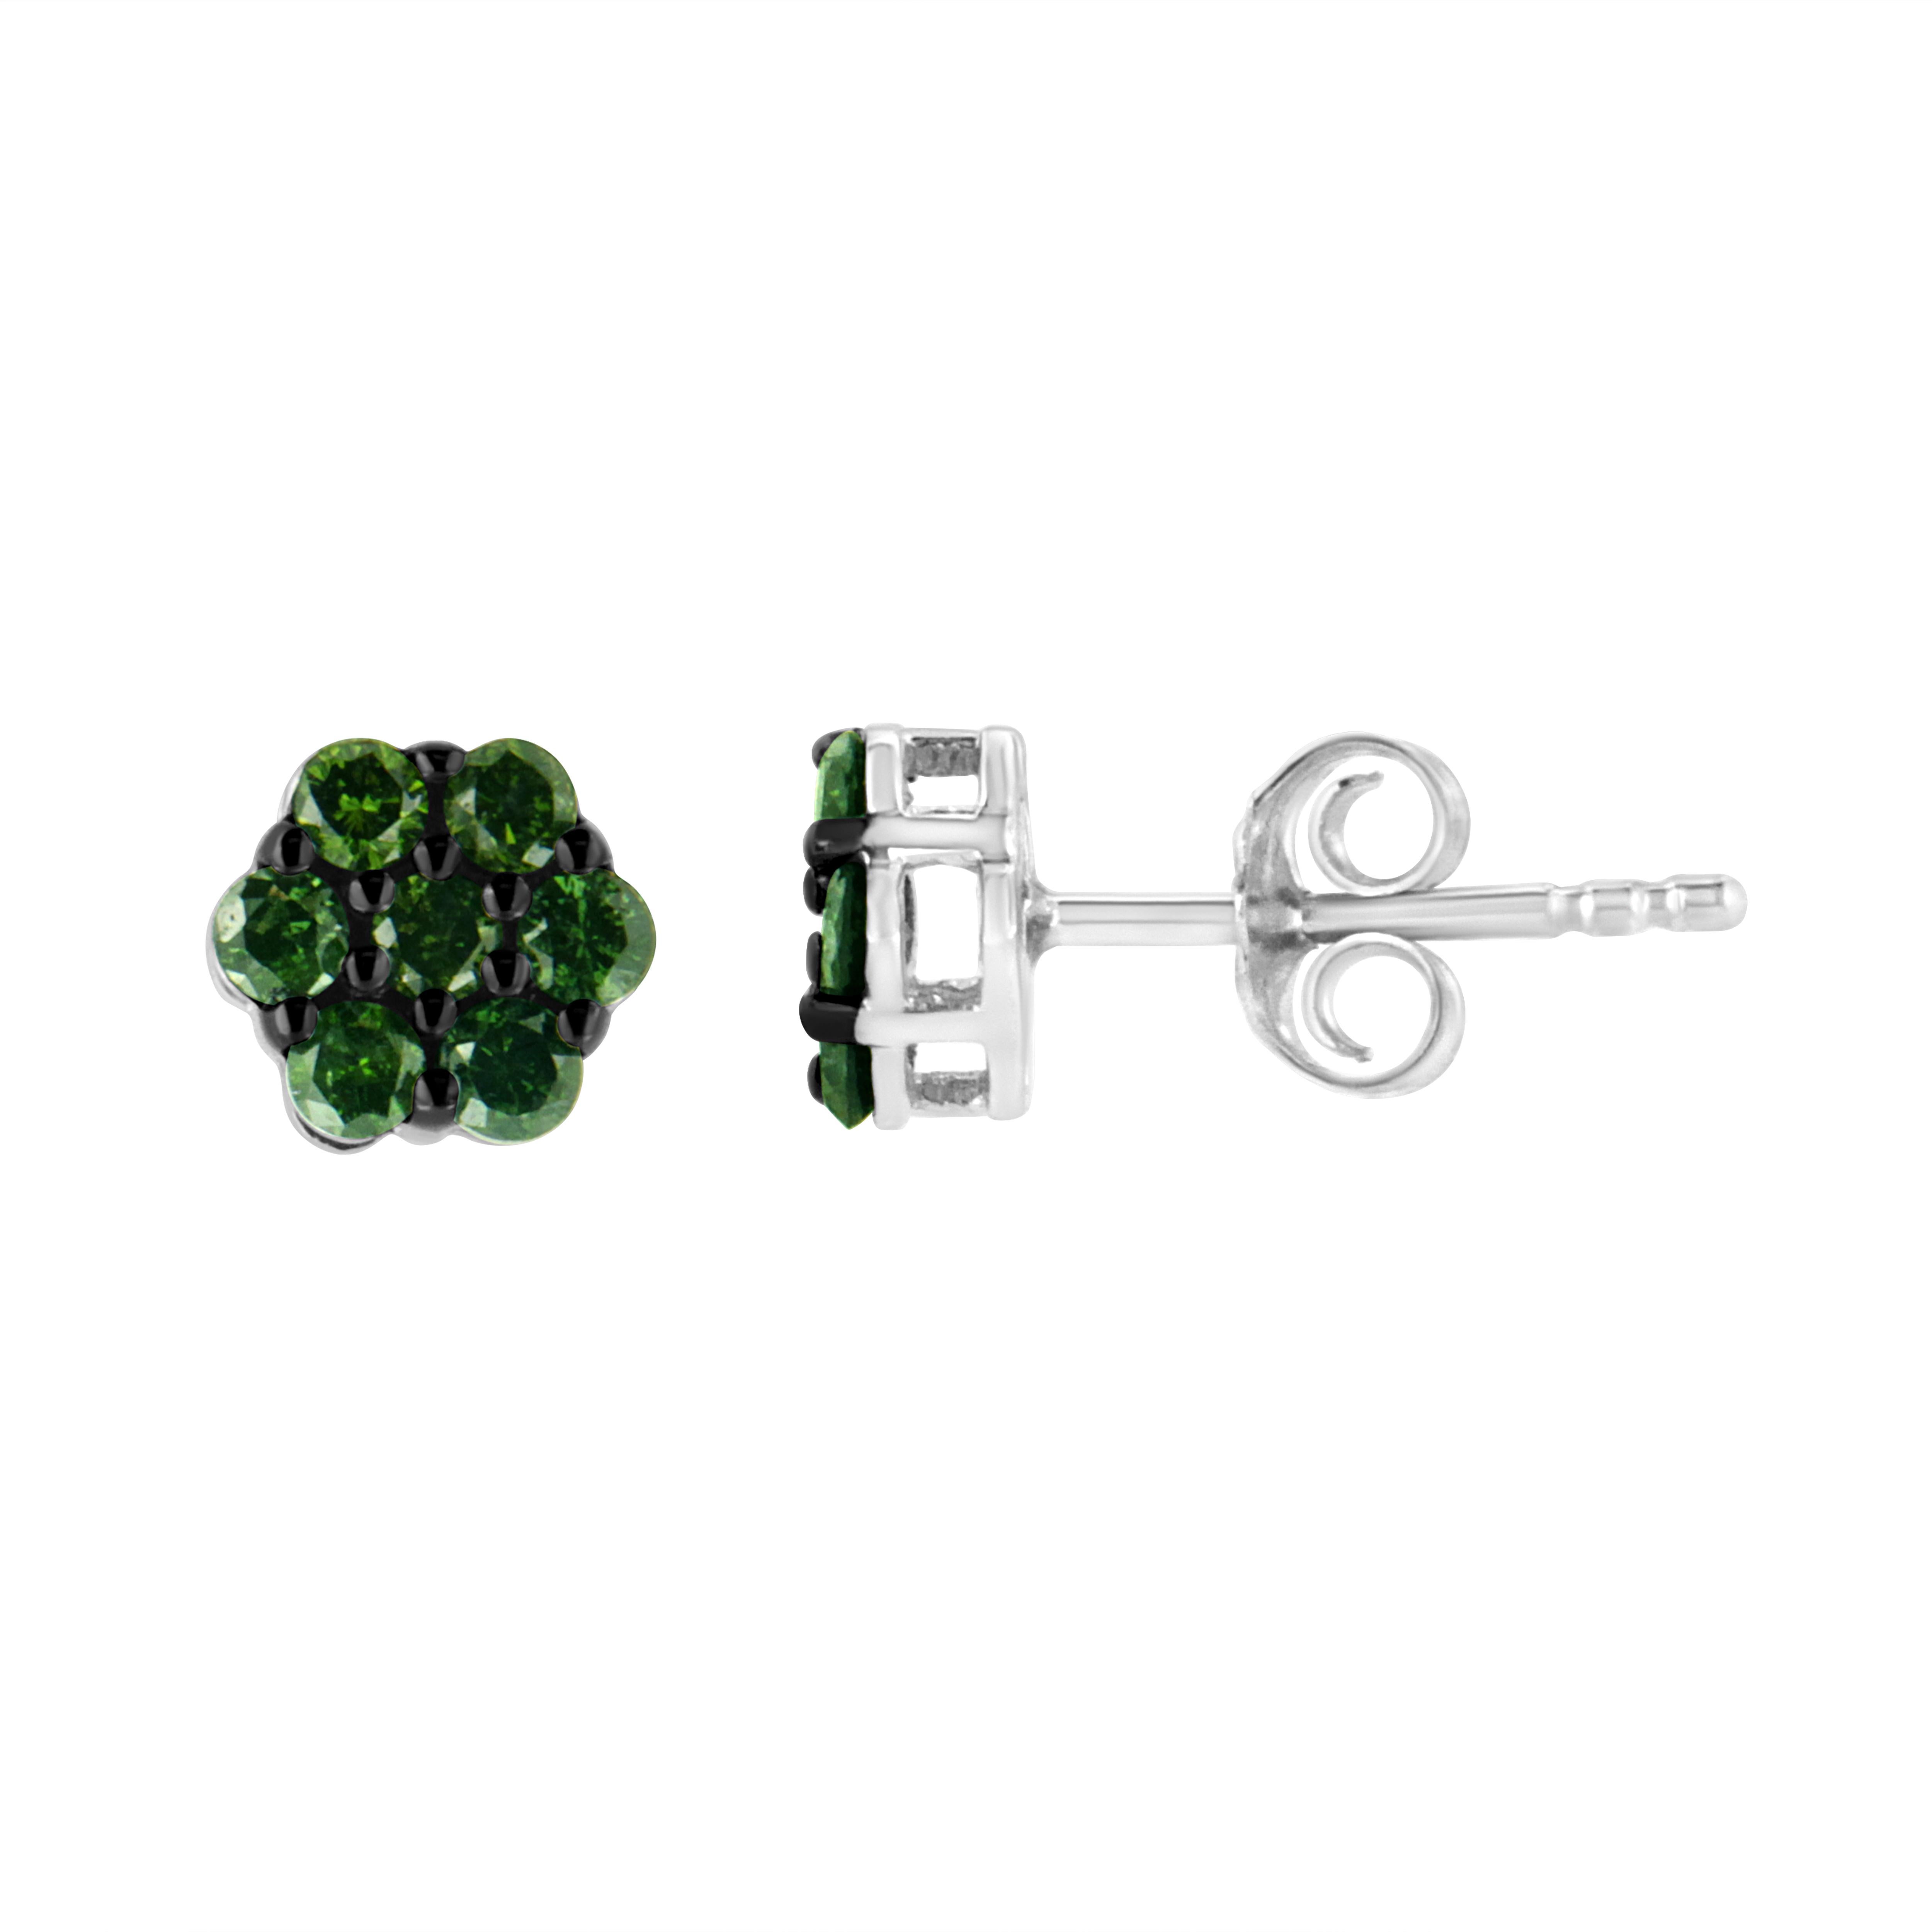 You will fall in love with these classic cluster stud earrings. A must have for any serious jewelry collection, these .925 sterling silver earrings boast an impressive 2.0 carat total weight of treated green diamonds with seven stones each. The